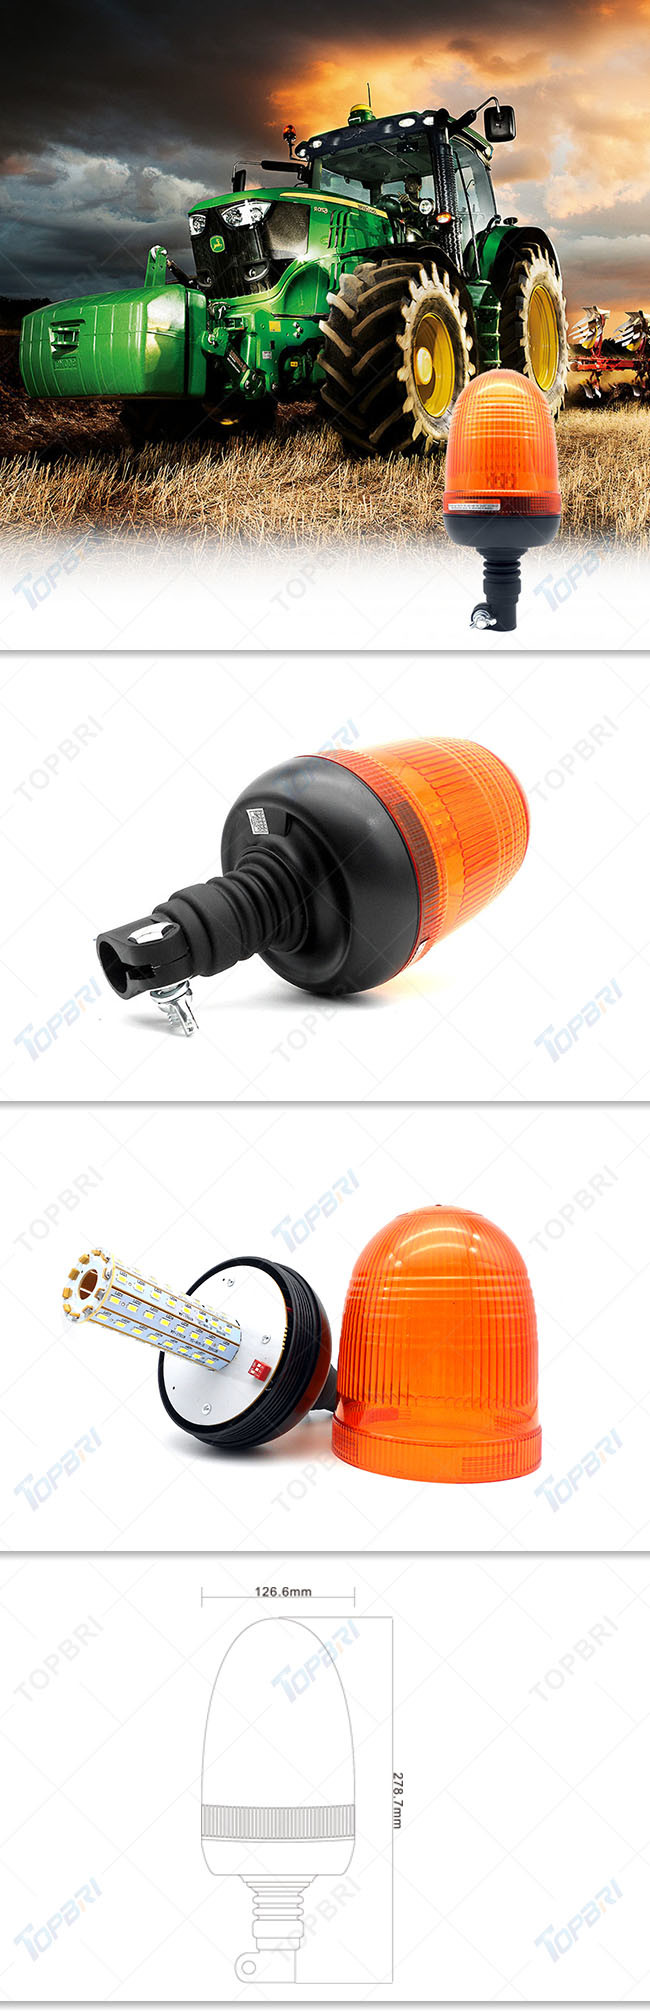 LED Warning Beacon Lights with Flexible DIN Pole Mount